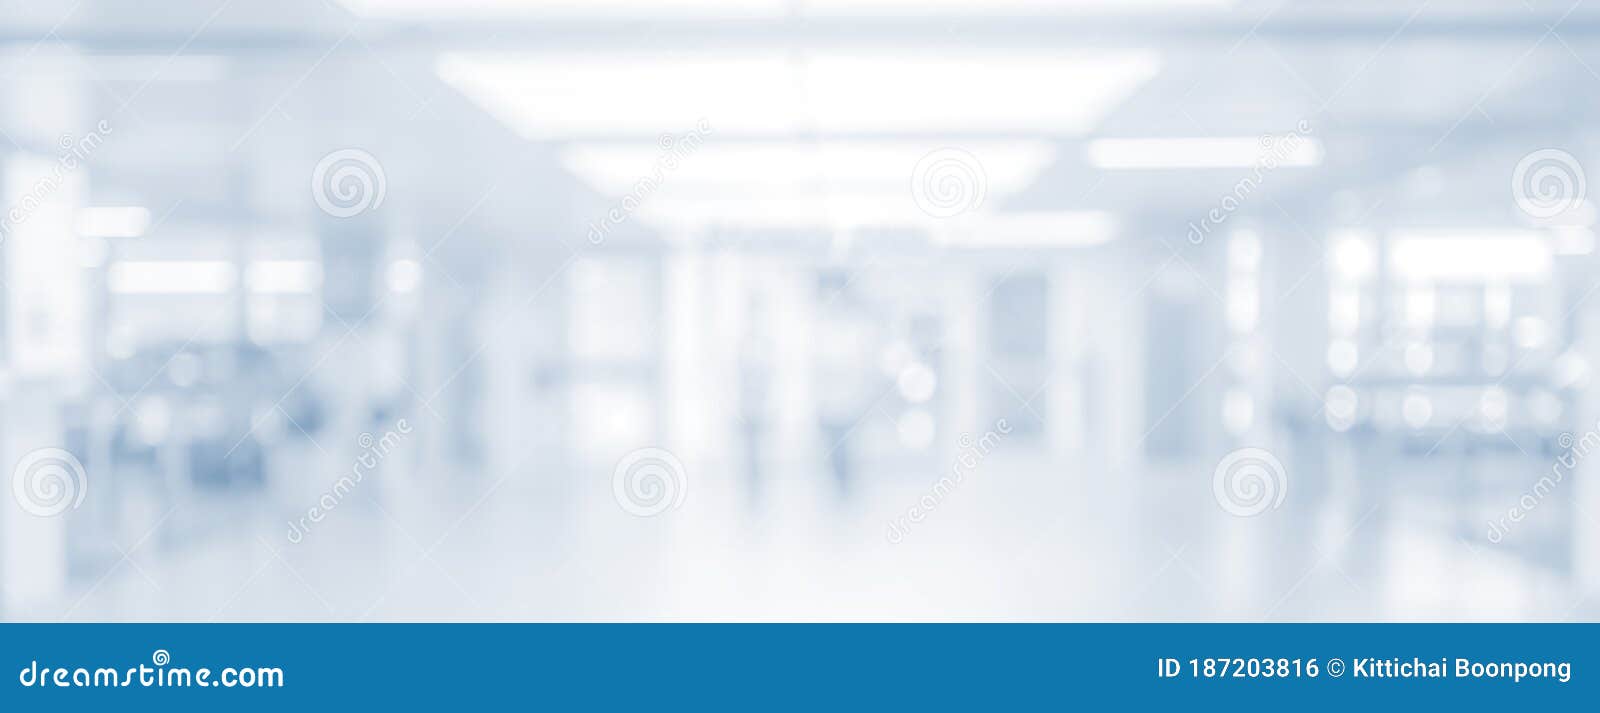 medical blurred background for website, magazine or graphic for commercial campaign 